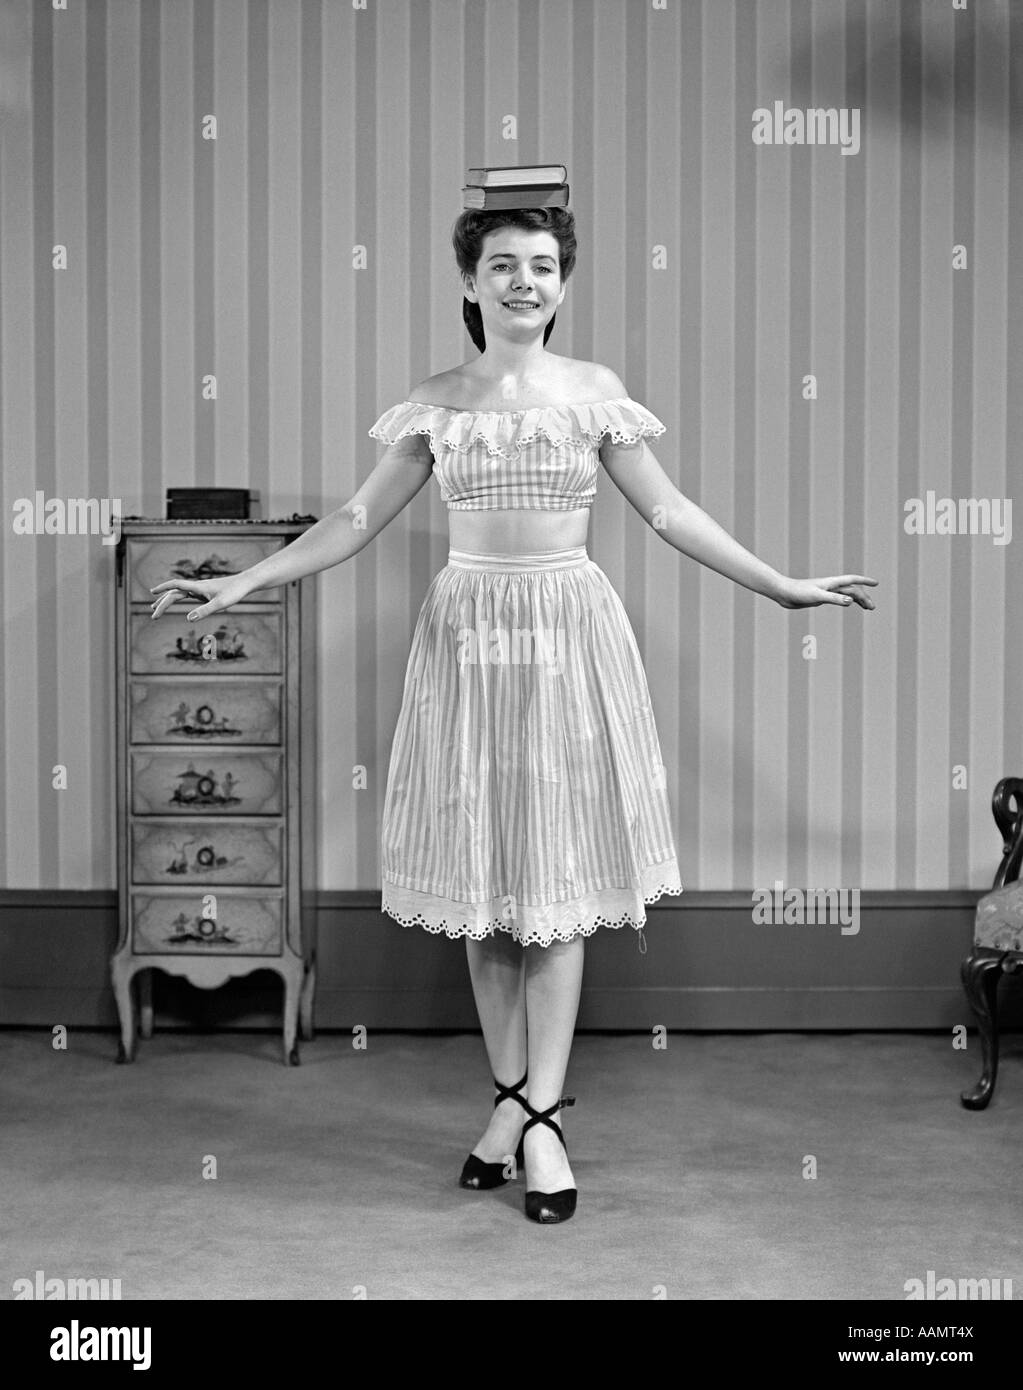 1940s 1950s YOUNG WOMAN IN DRESS BALANCING BOOKS ON HEAD Stock Photo